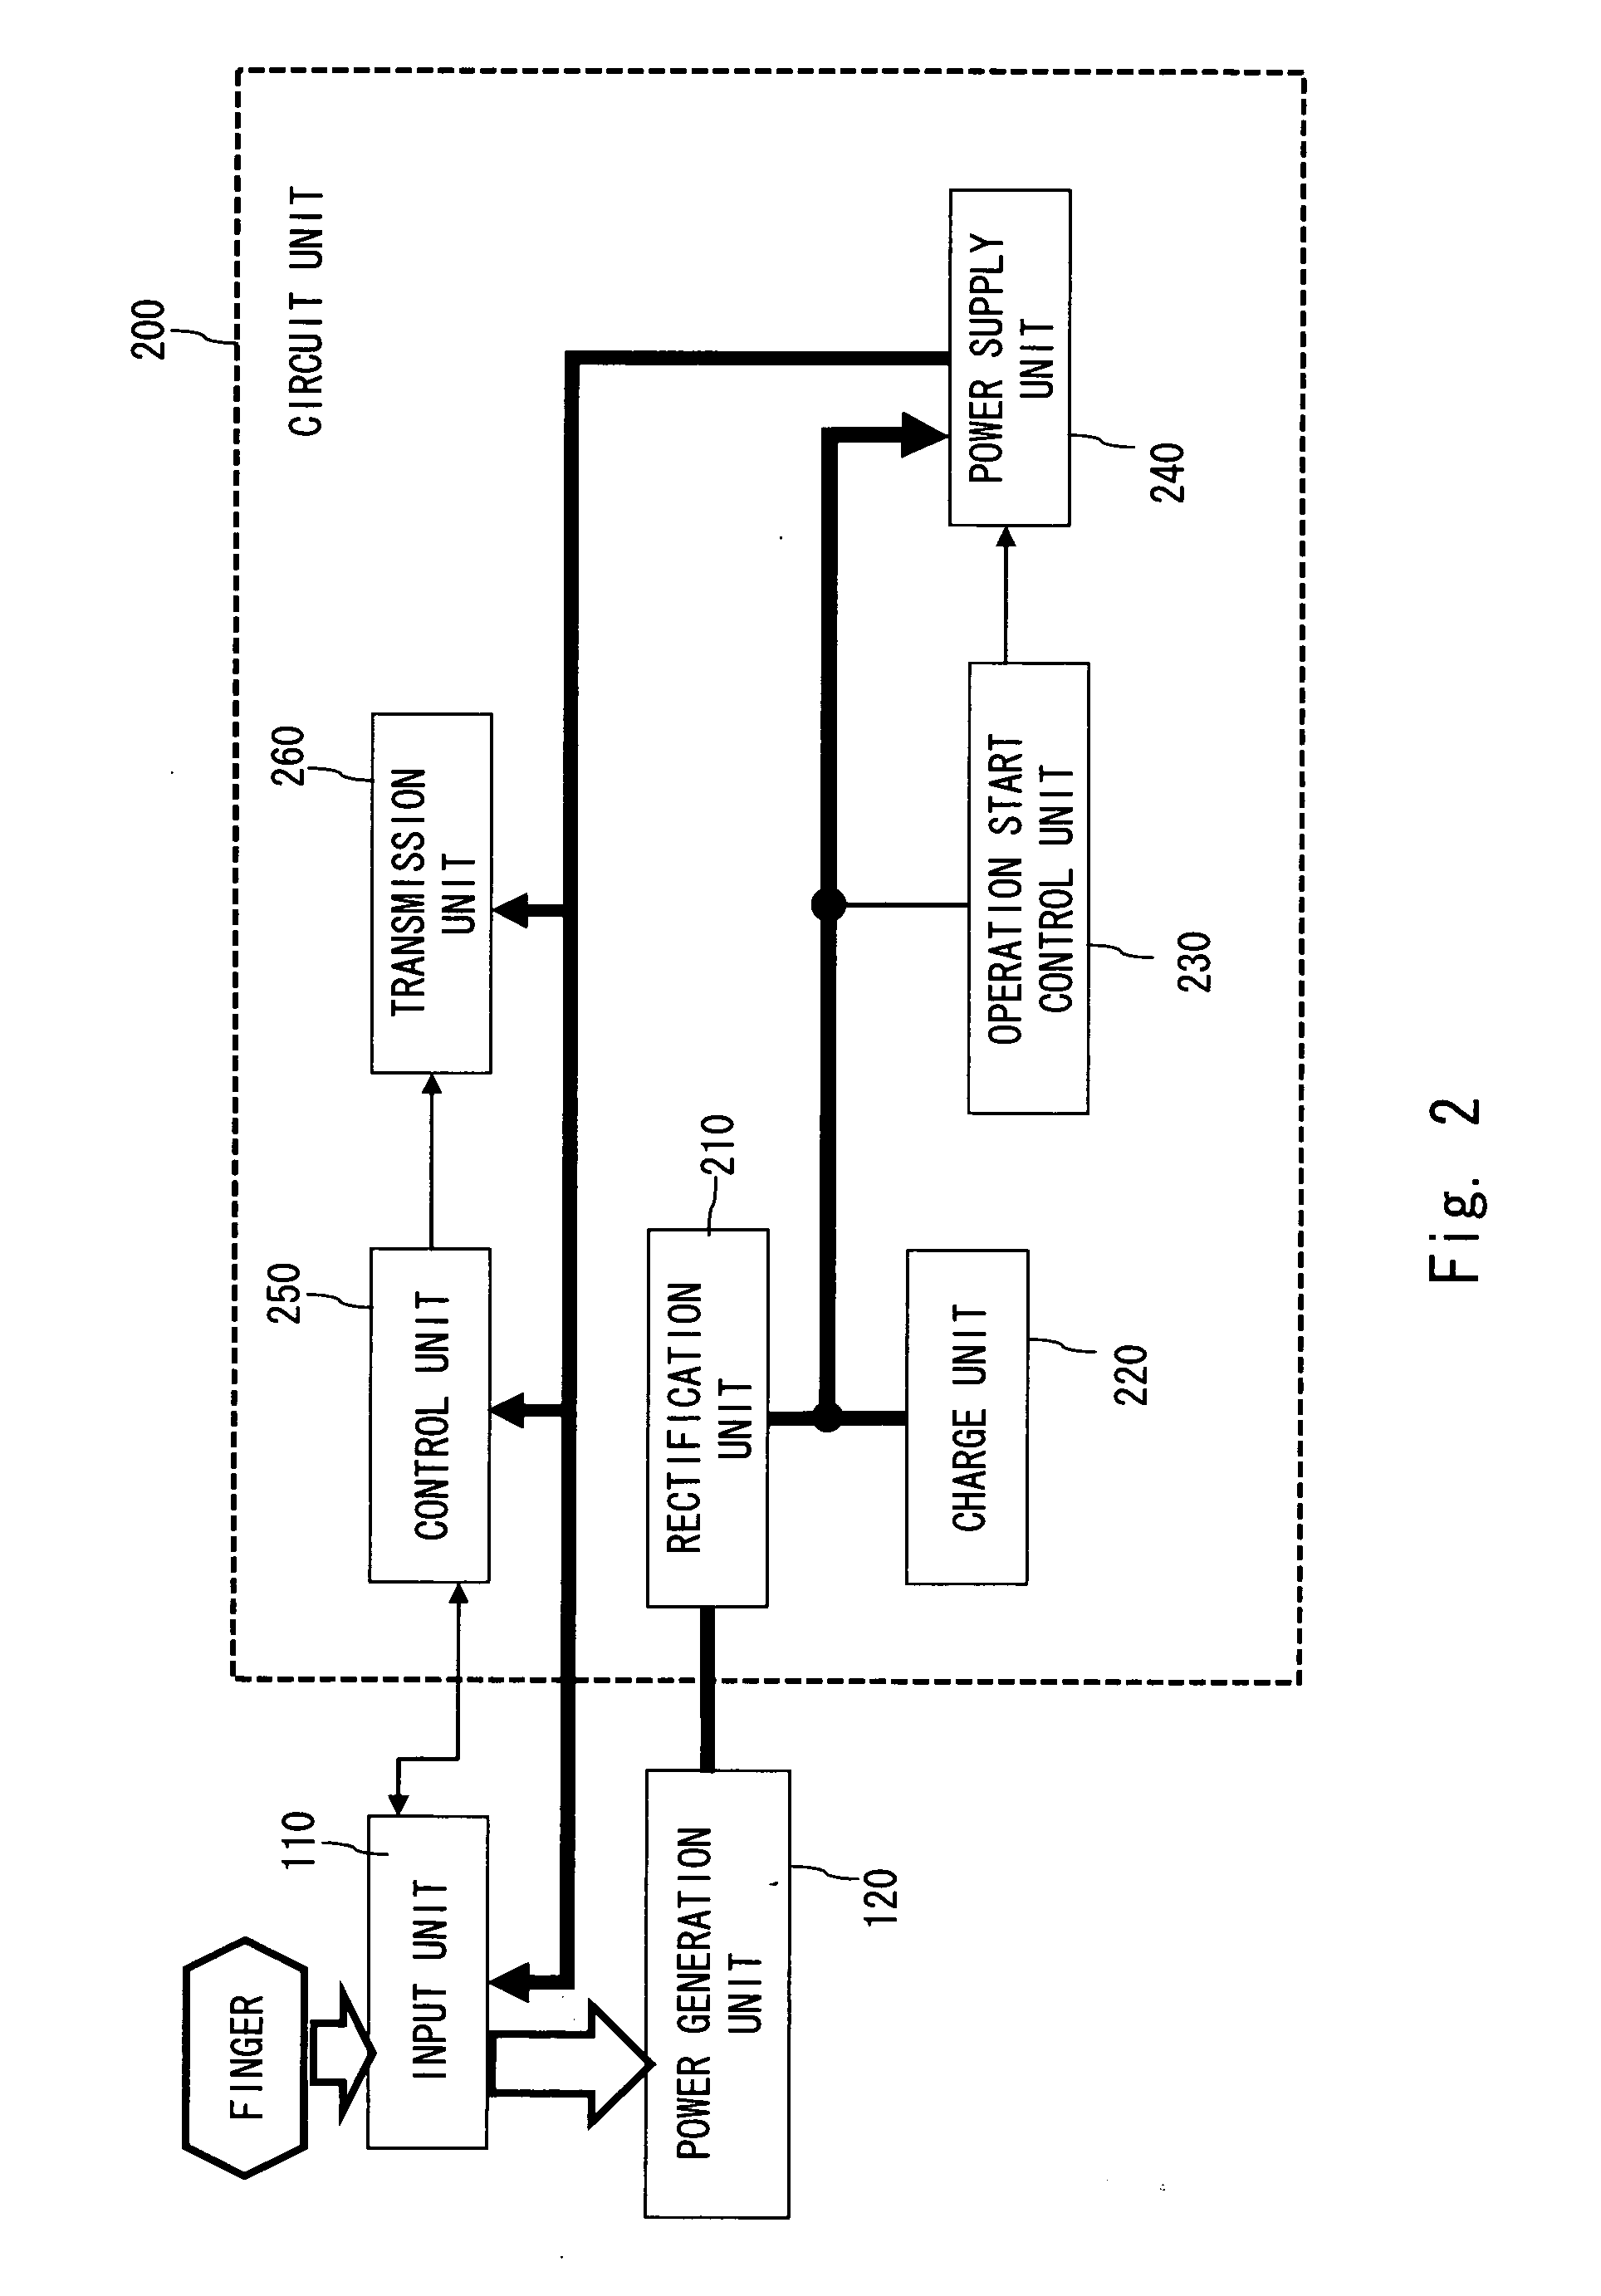 Manual control device with power generation function and remote control device with power generation function